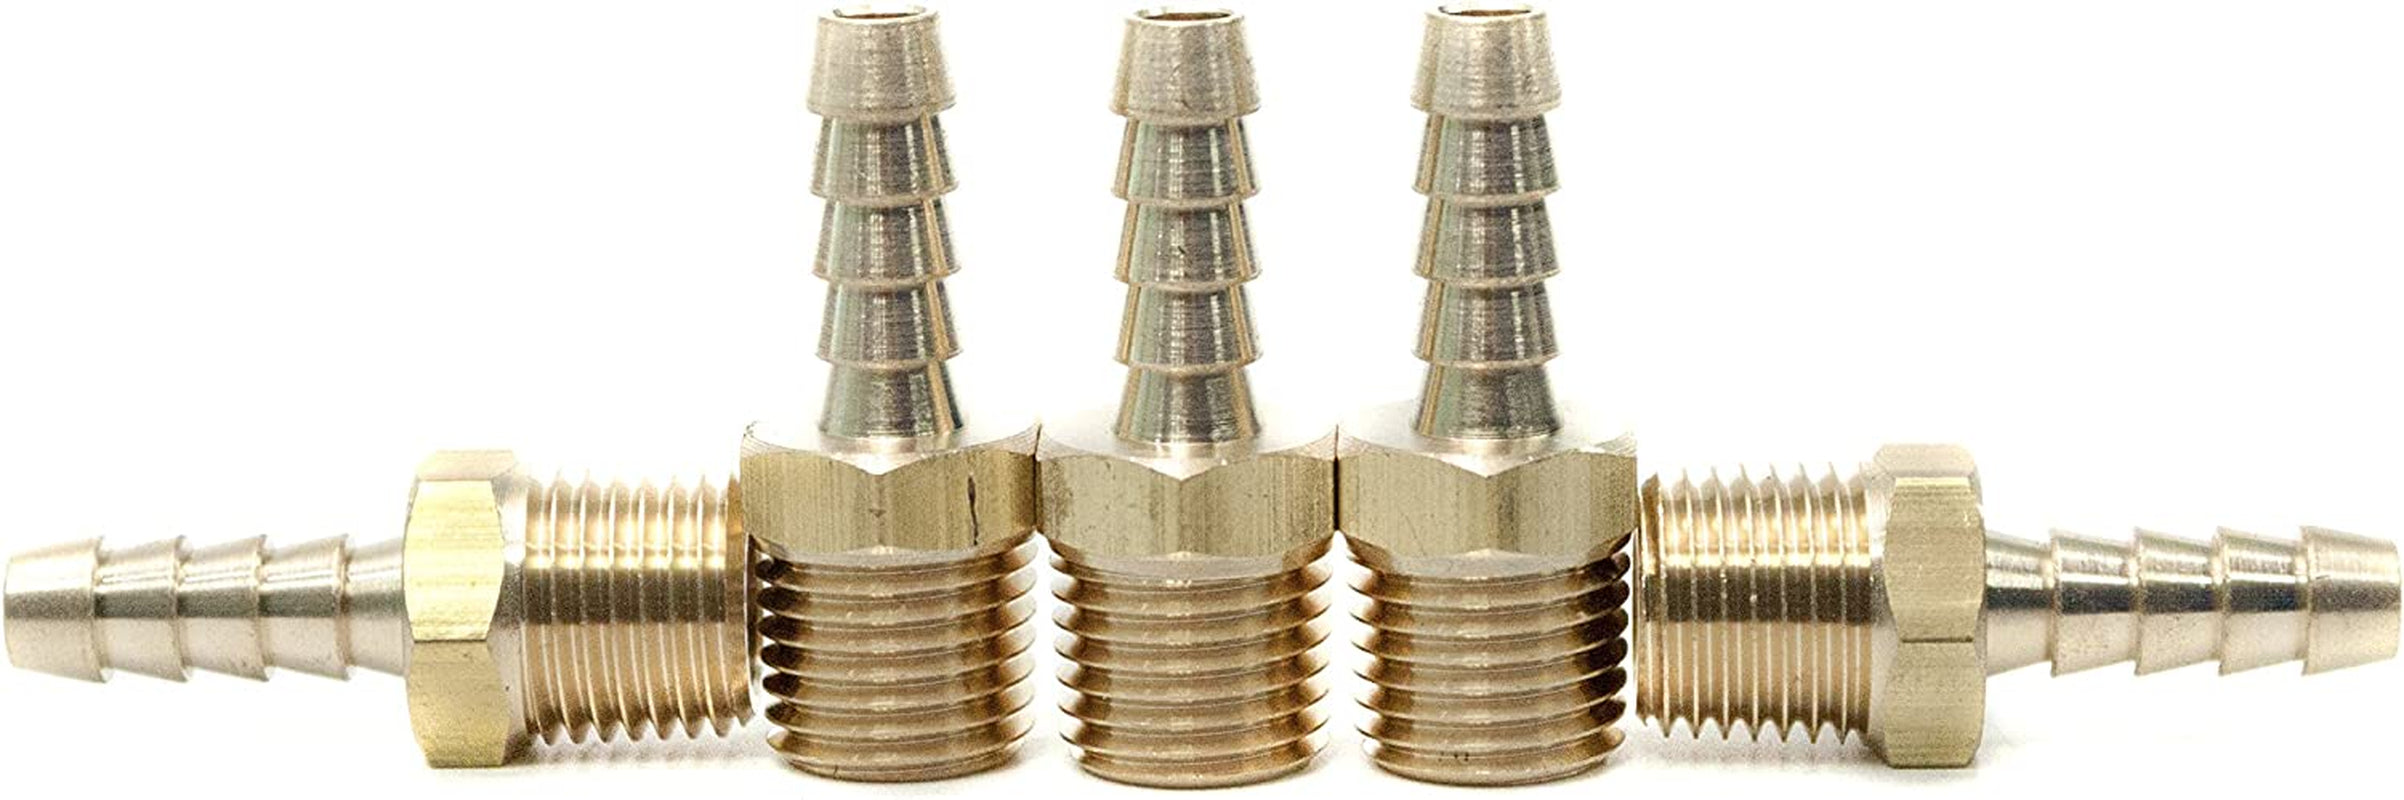 LTWFITTING, LTWFITTING Brass Fitting Coupler 1/4-Inch(6Mm) ID Hose X 1/4-Inch Male NPT Fuel Gas Water (Pack of 5)